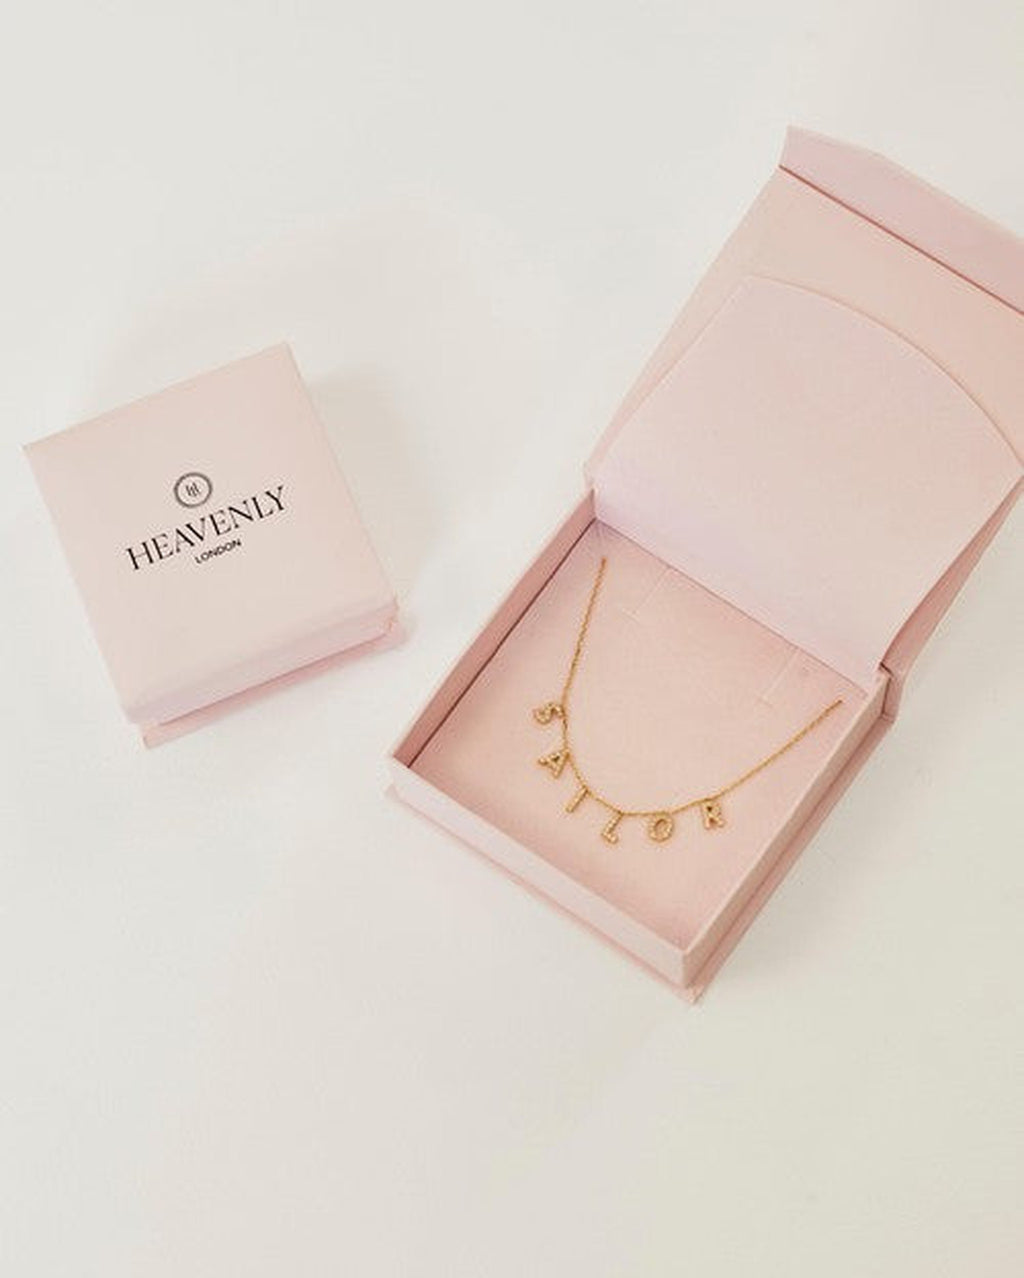 The Bespoke Gold and Diamond Name Necklace